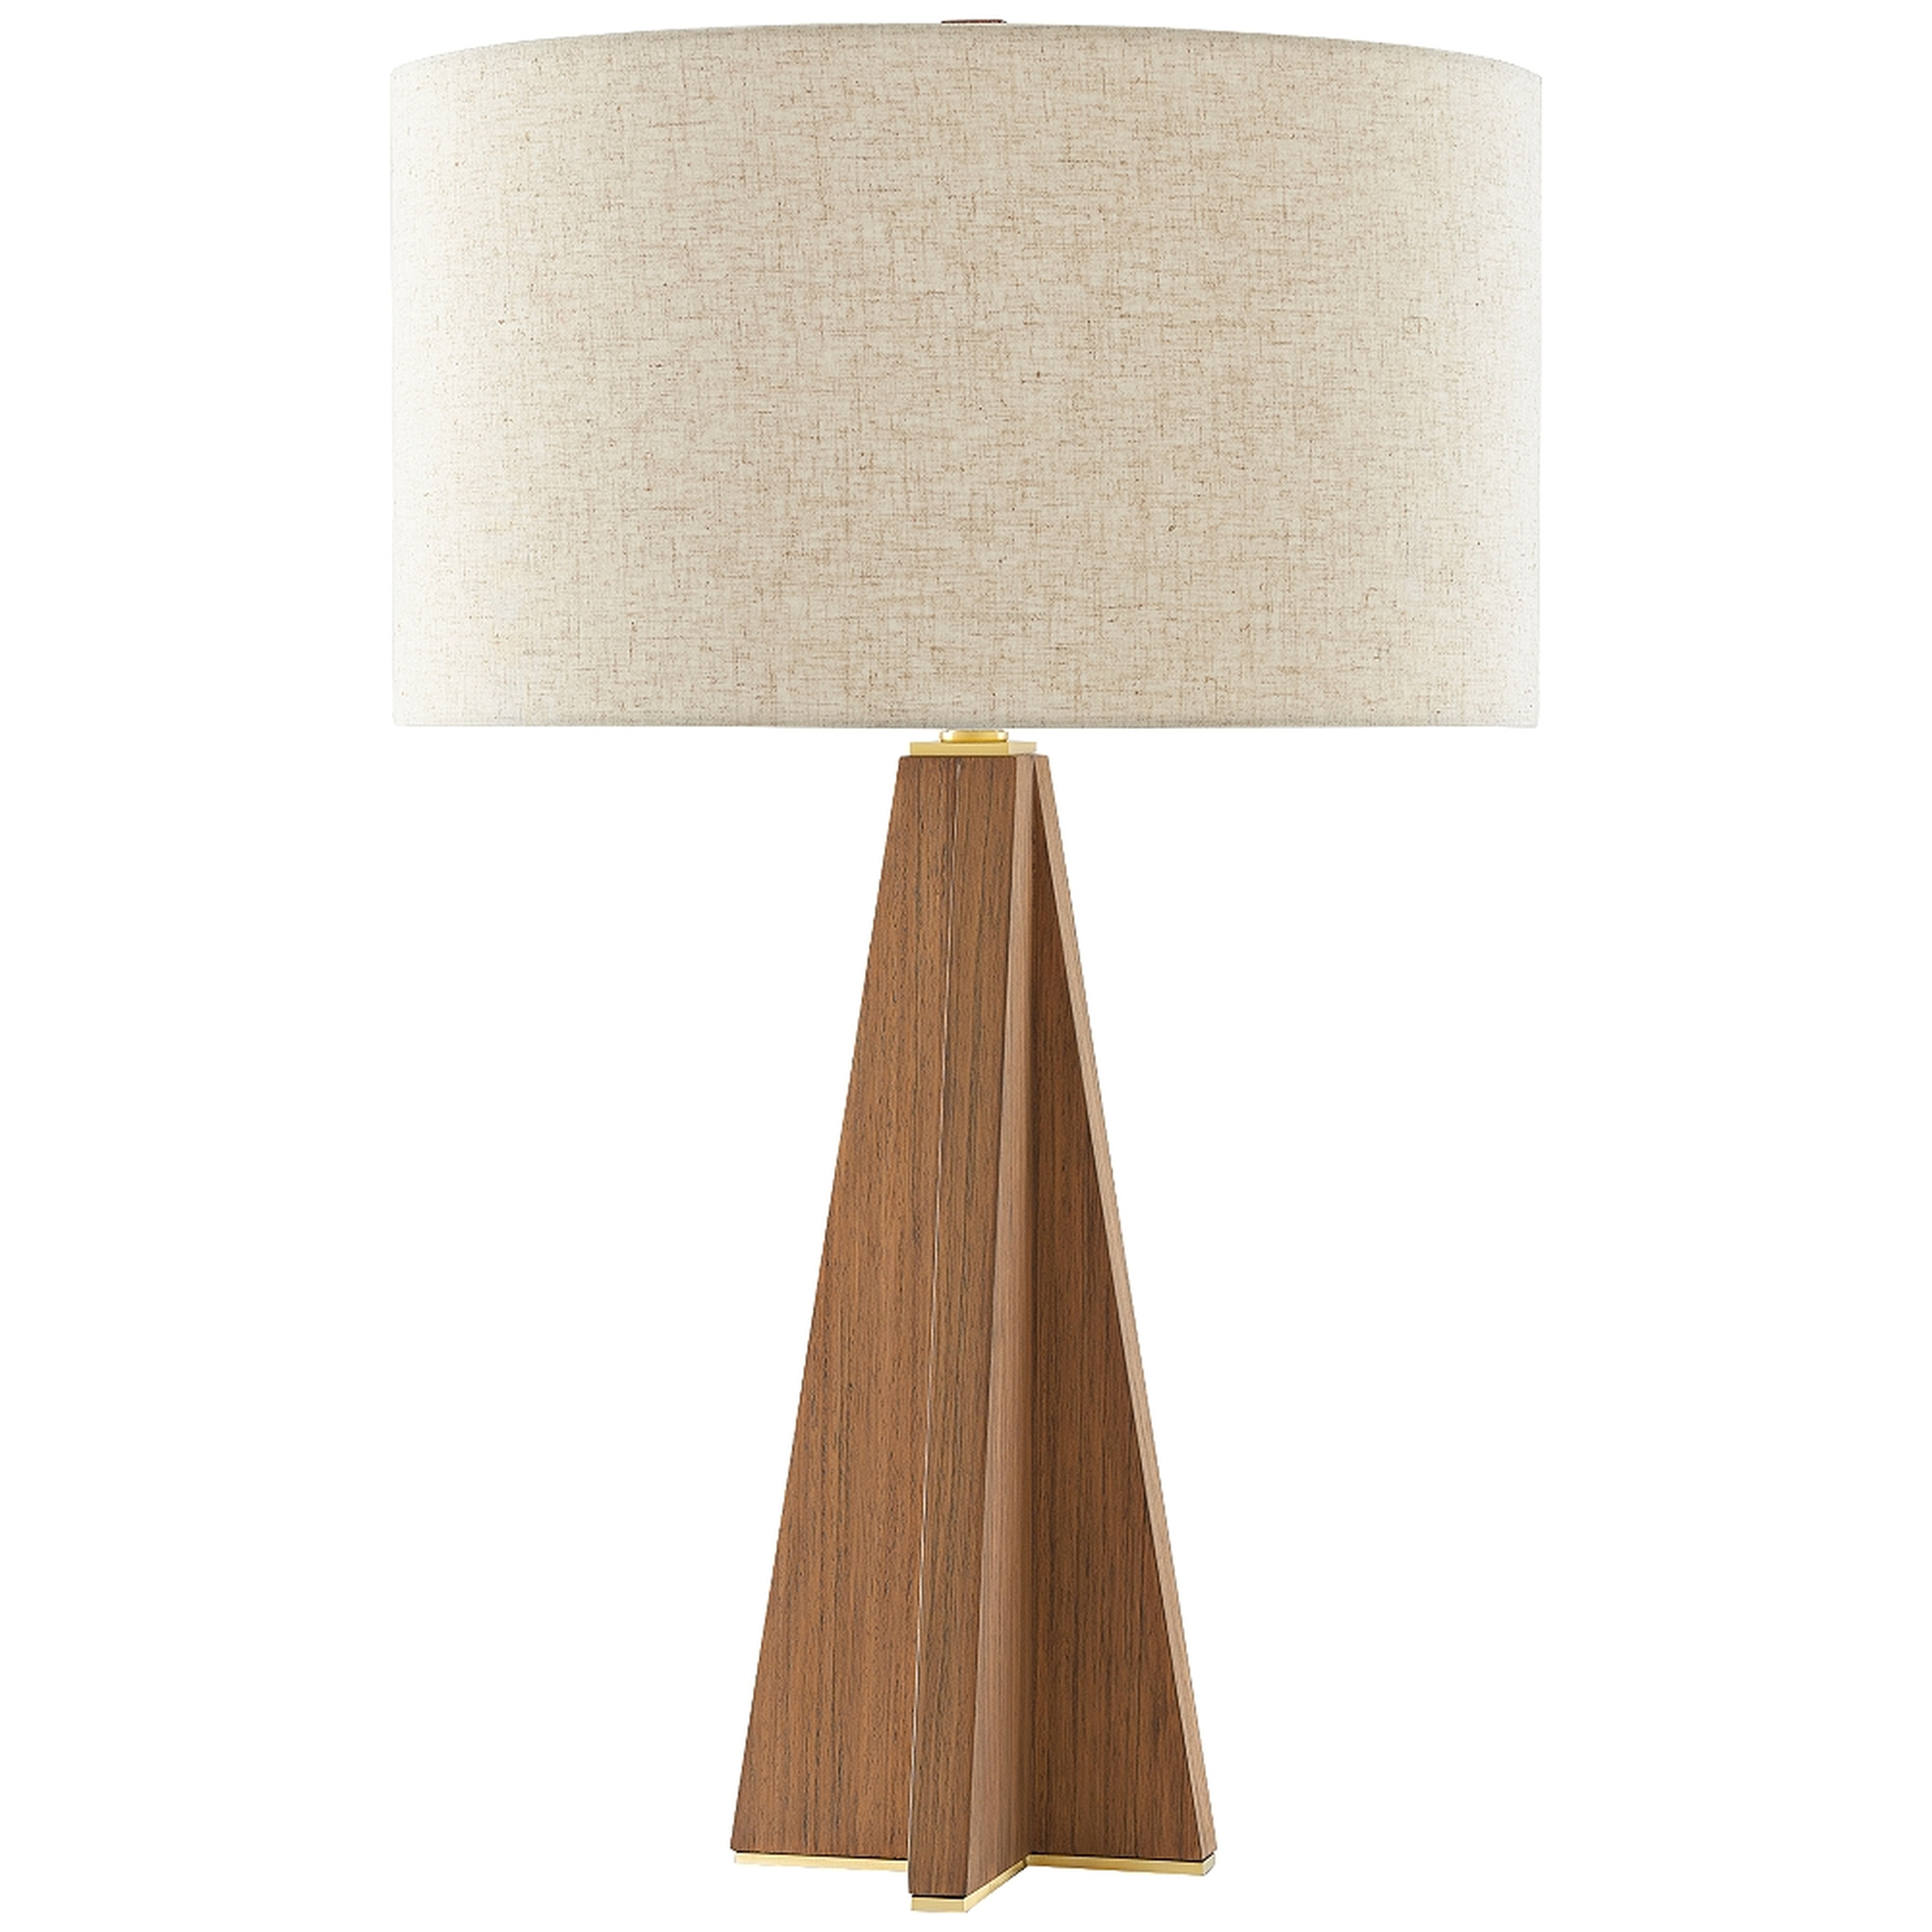 Currey and Company Virtuosa Teak Wood Table Lamp - Style # 88N56 - Lamps Plus